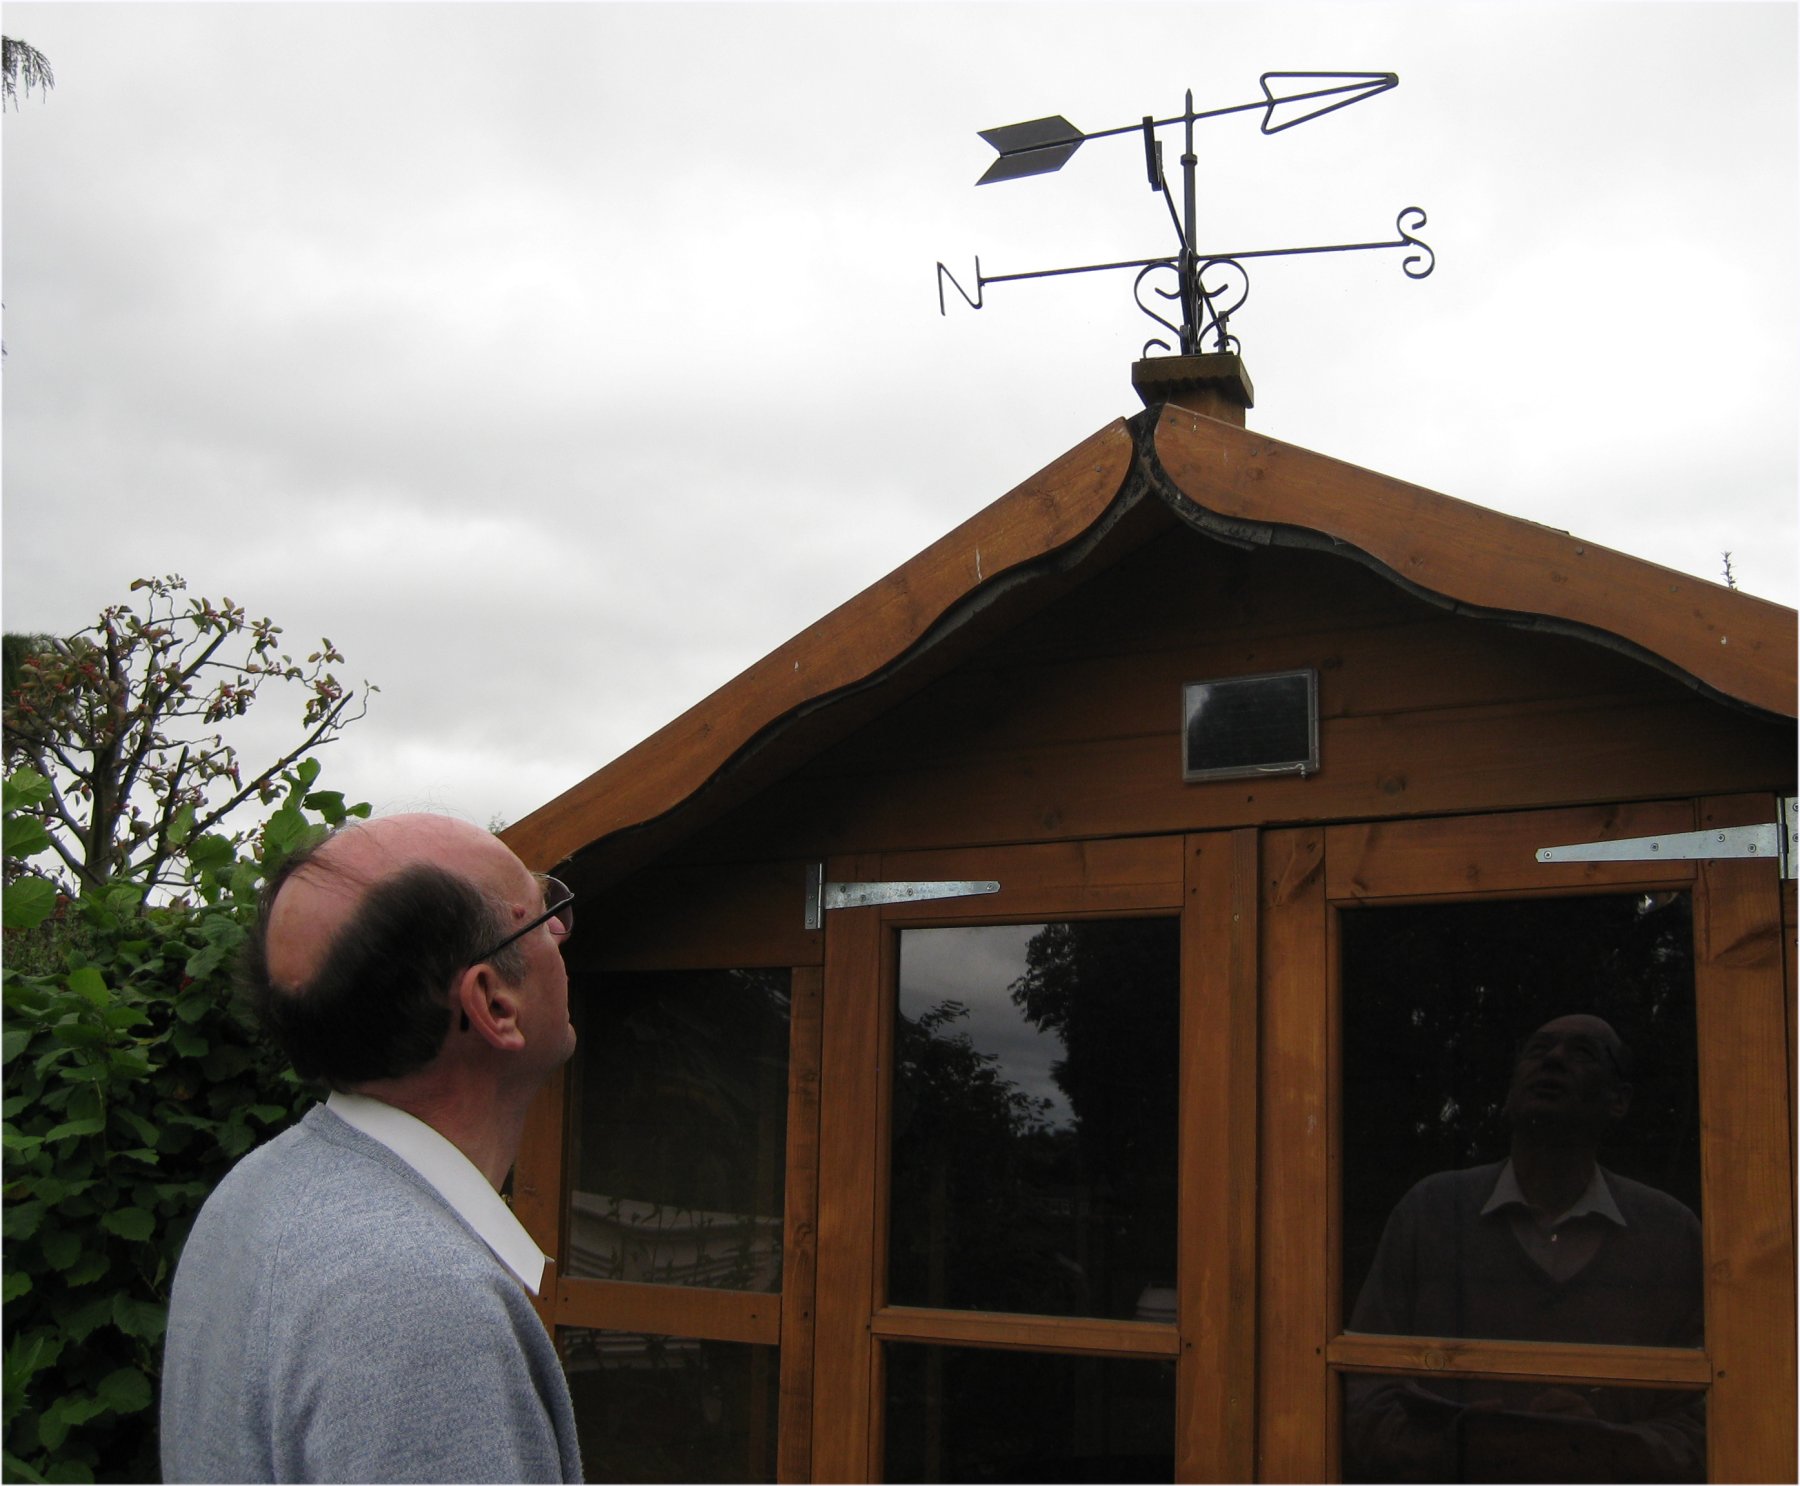 a person looking at a weather vane